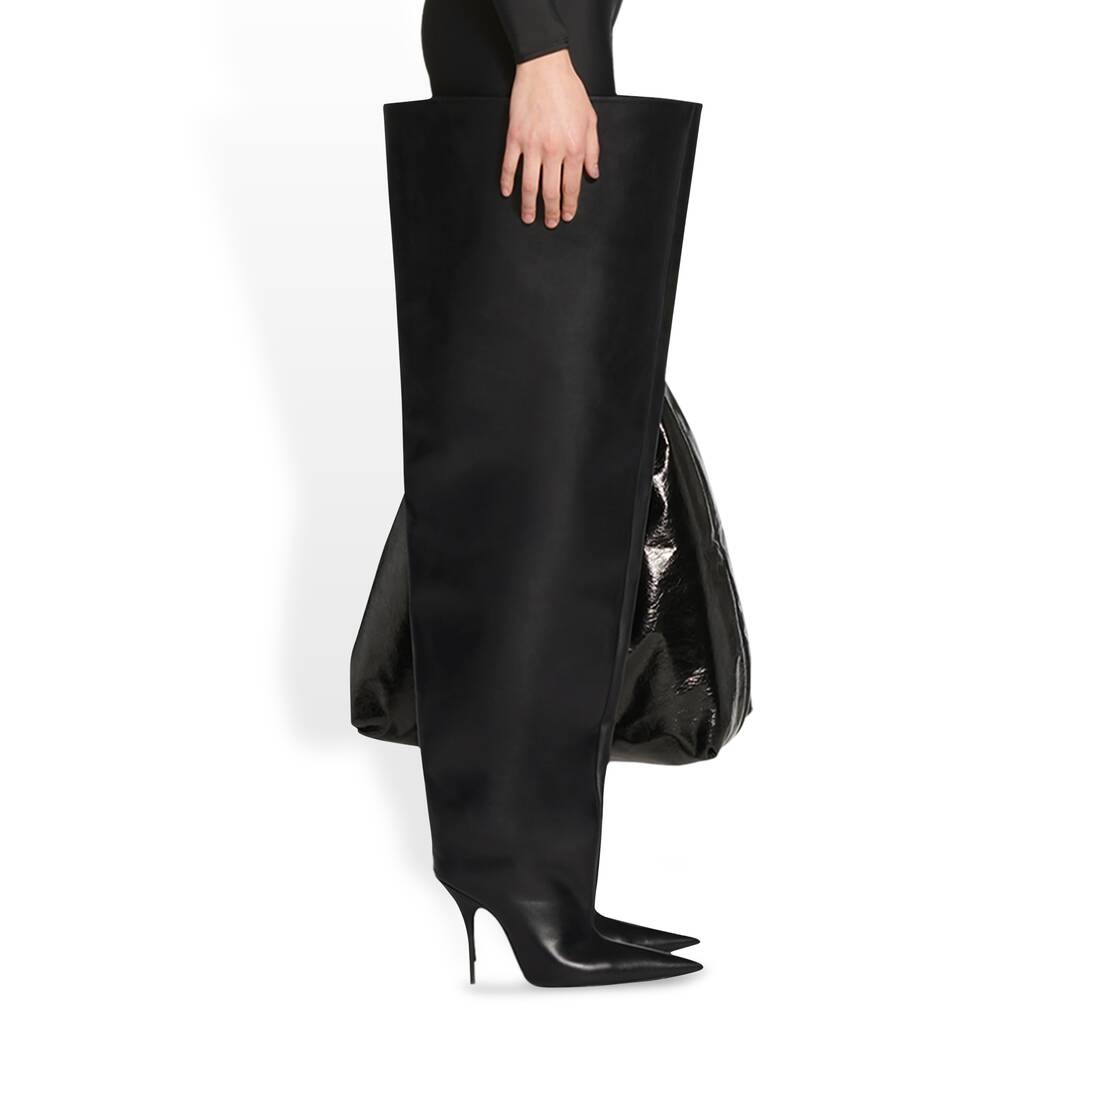 waders 110mm over-the-knee boot - 9